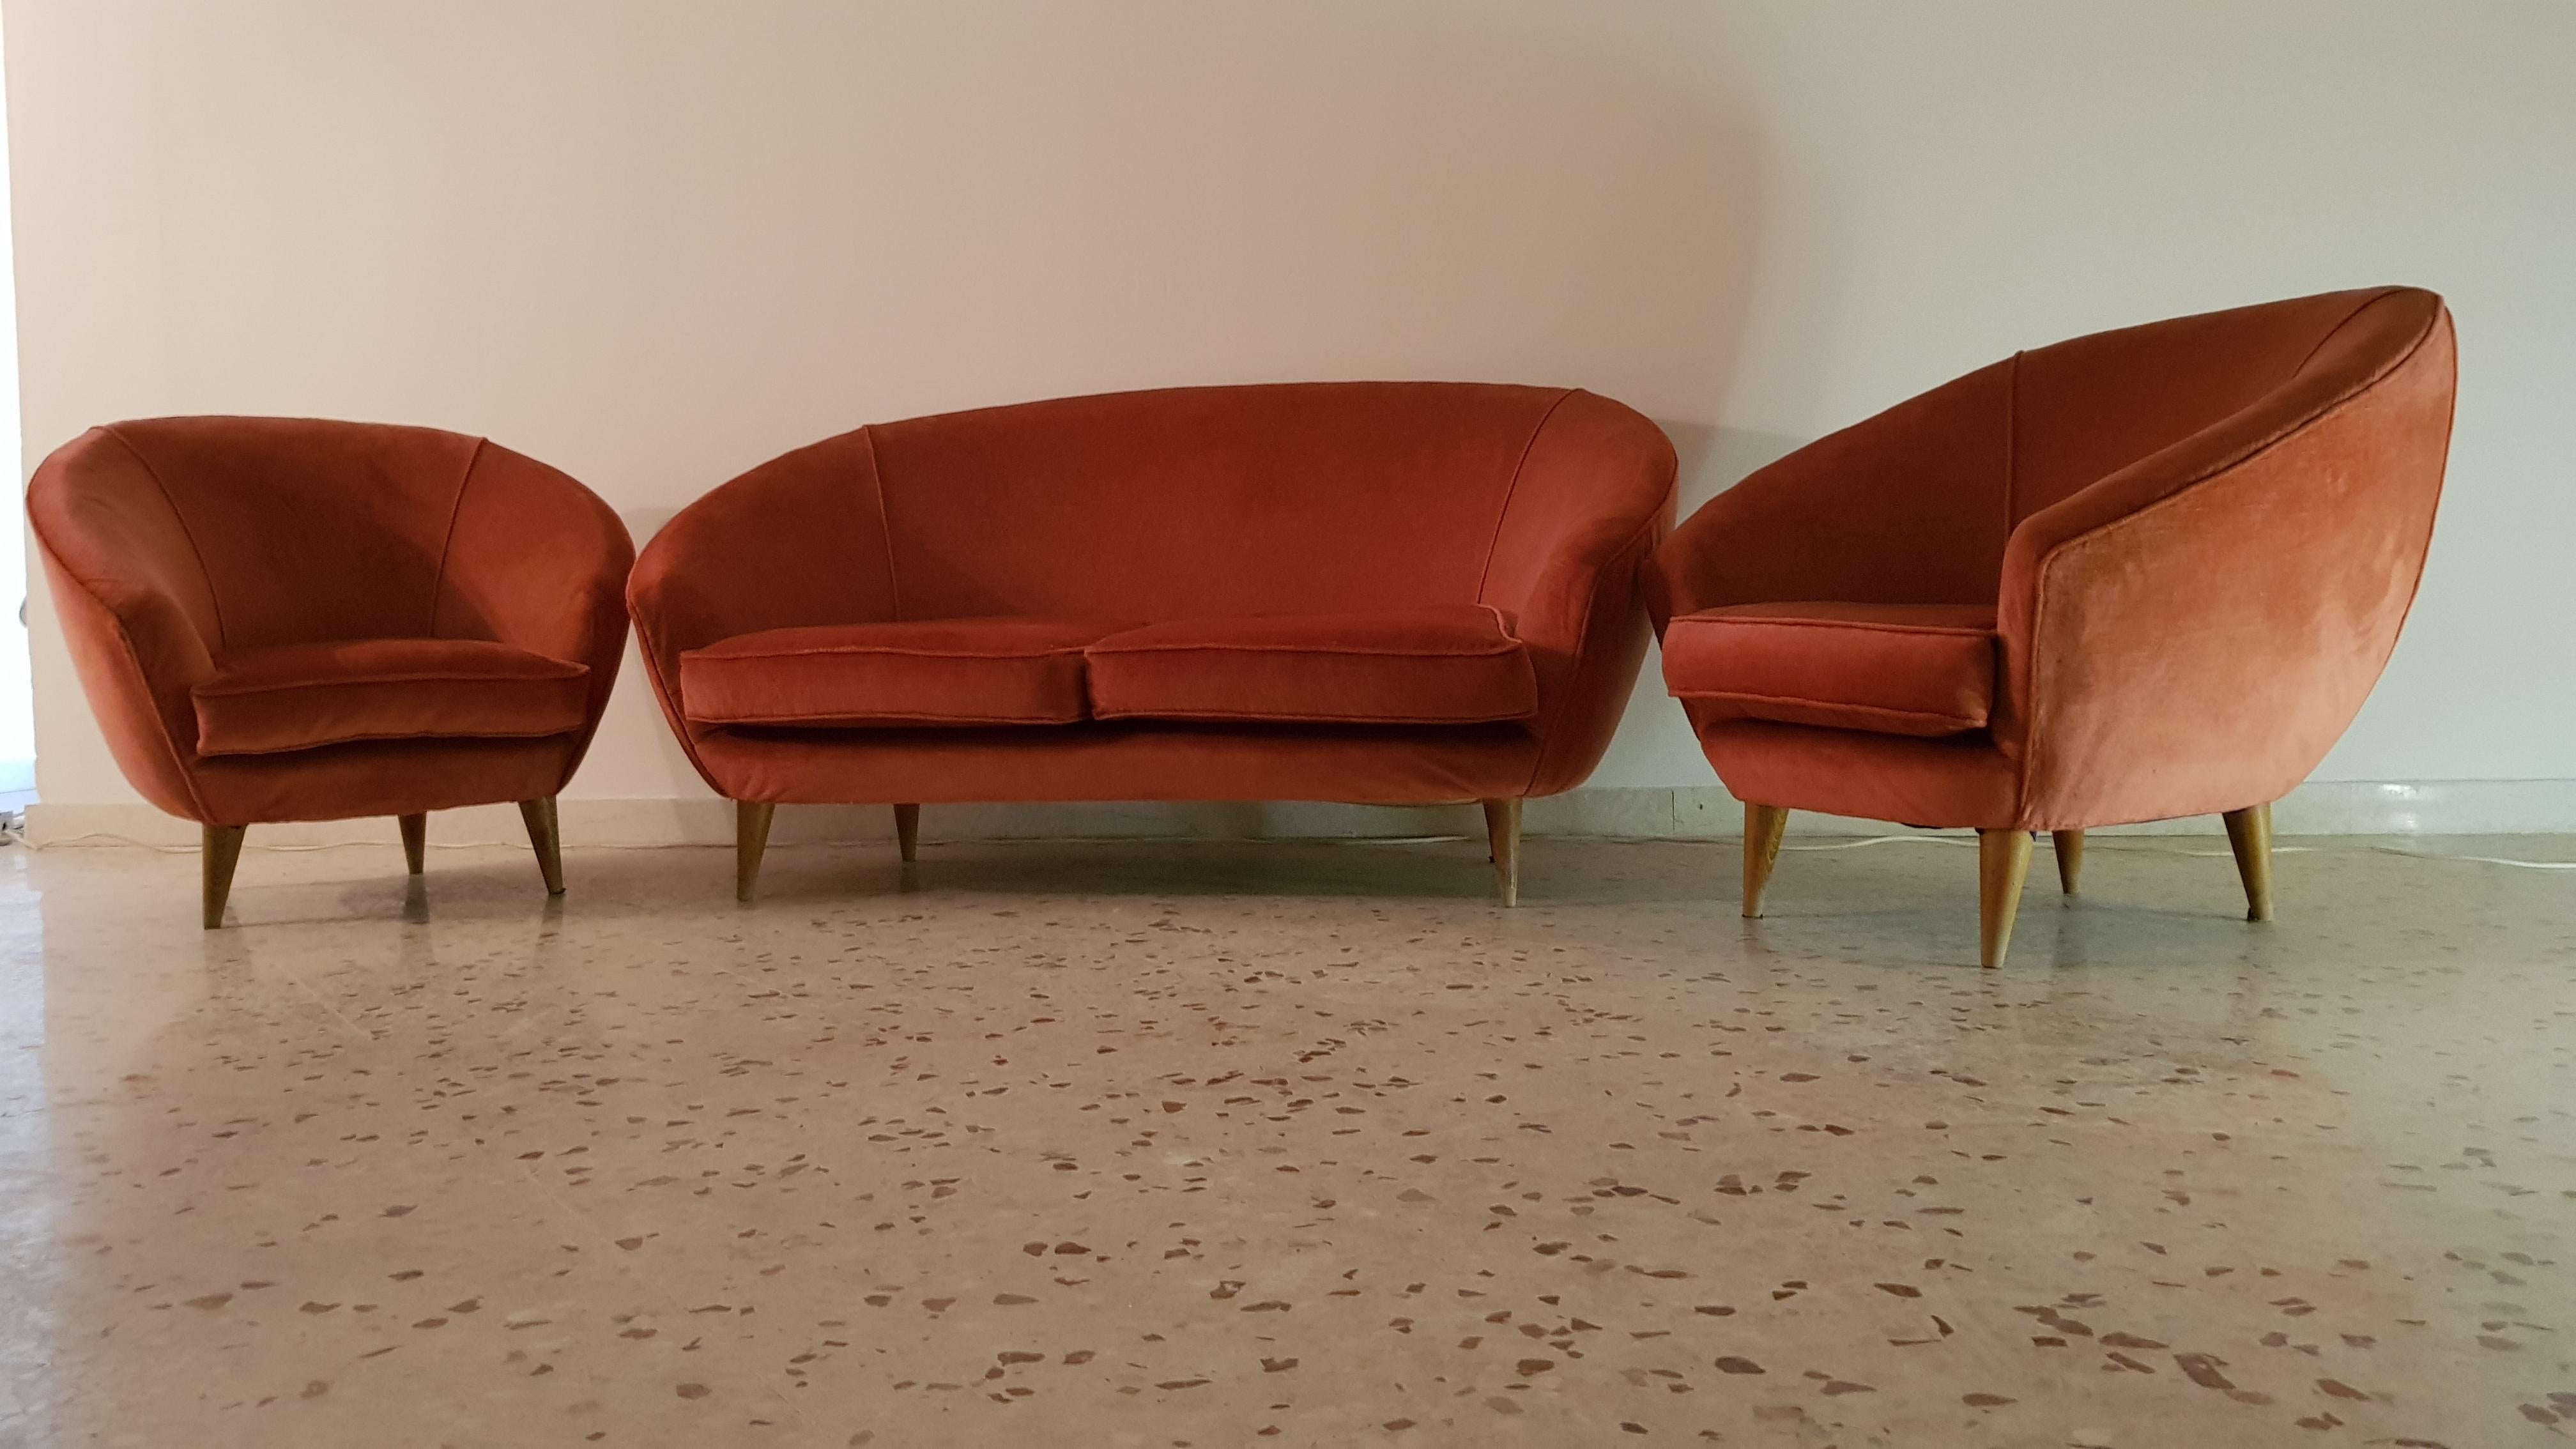 Italian Midcentury Sofà In the Style of Giò Ponti, Coral Velvet Armchairs 1950 set of 3 